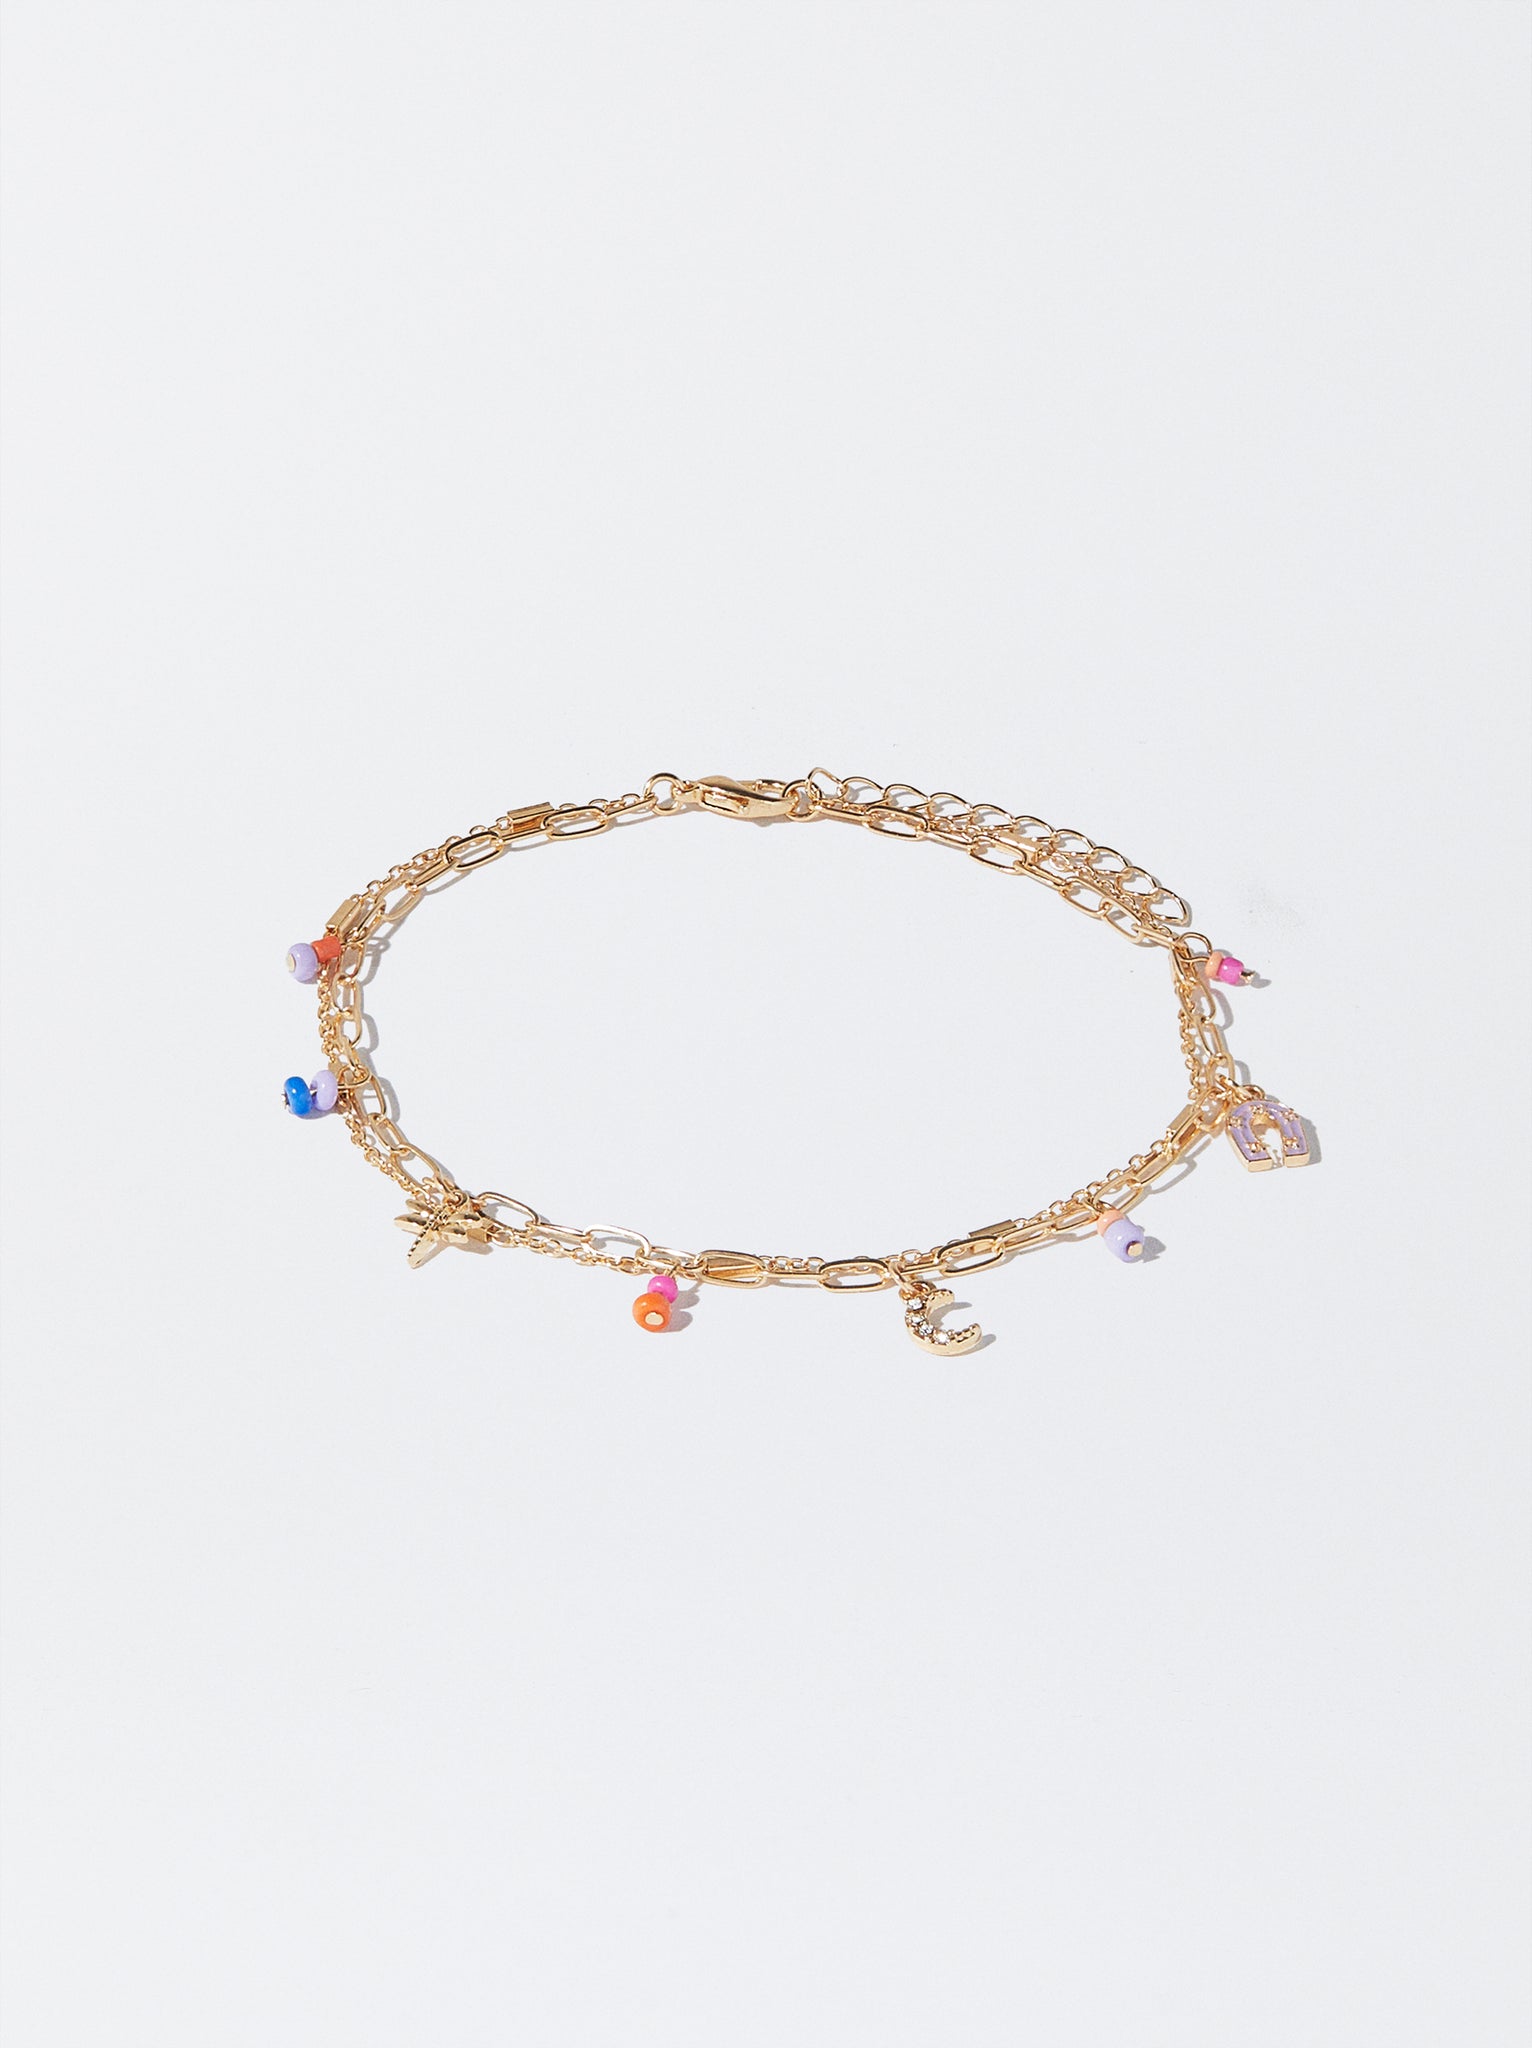 Anklet Bracelet With Charms